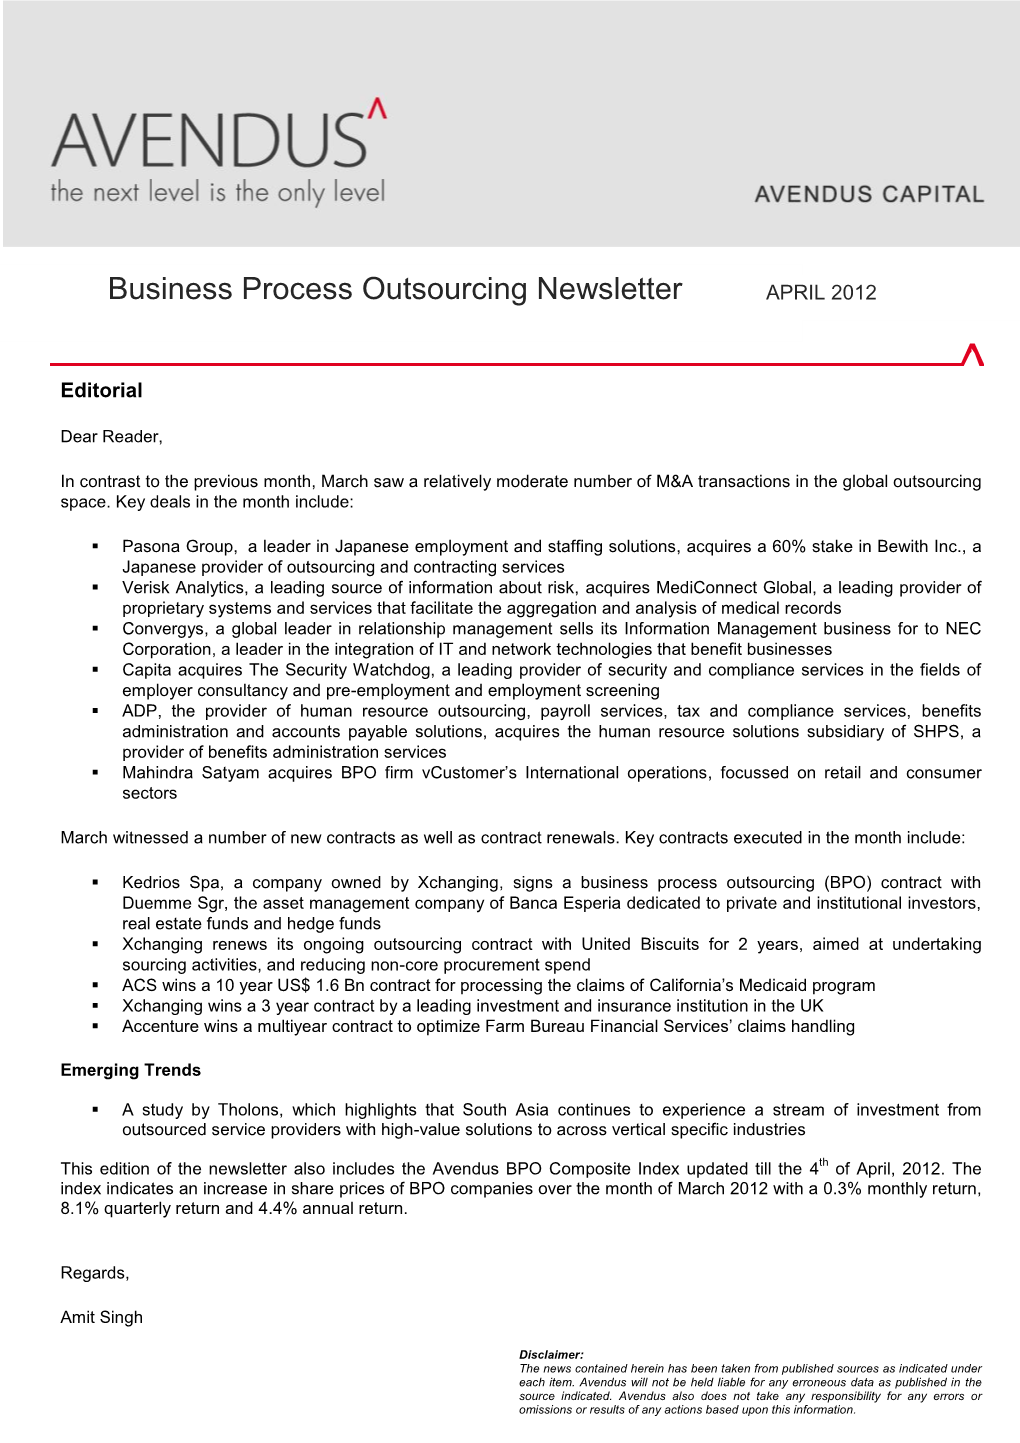 Business Process Outsourcing Newsletter APRIL 2012